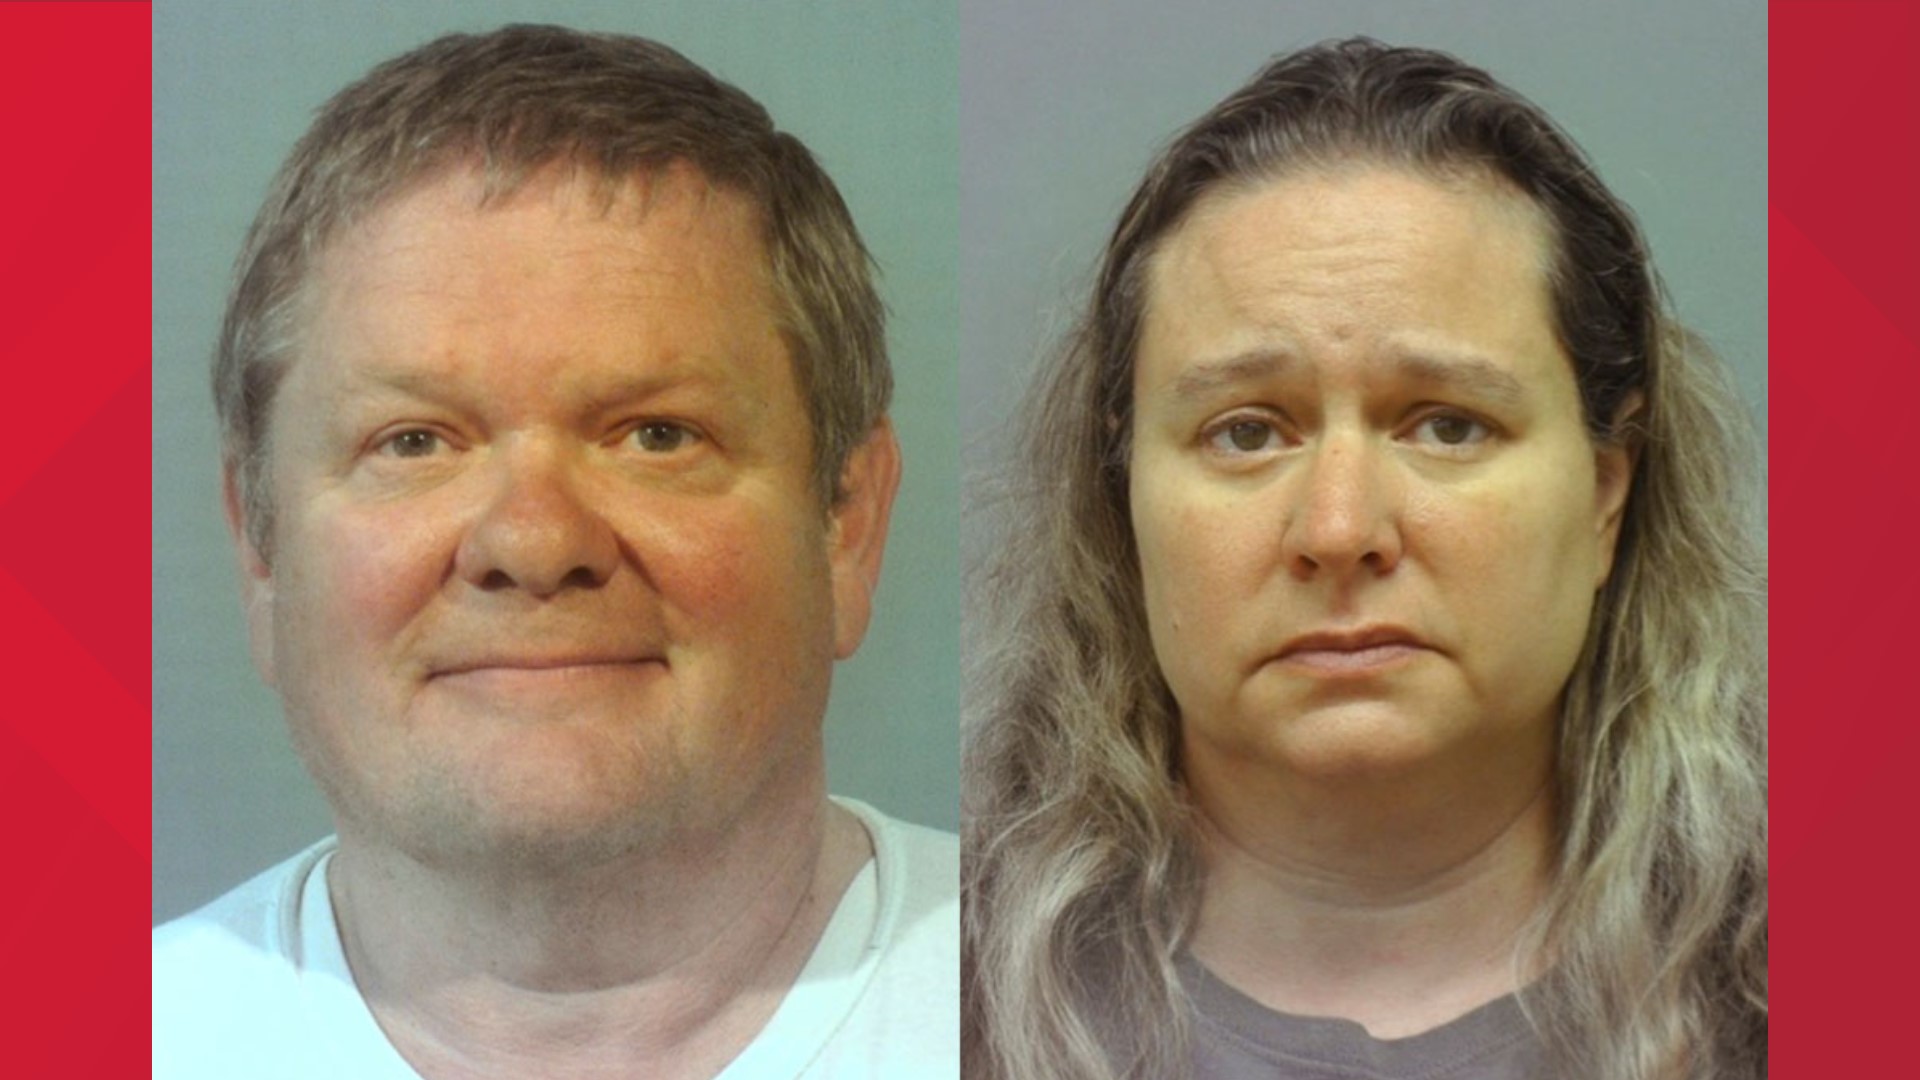 Robert and Deborah Bellar are expected to plead guilty to endangering children and engaging in a pattern of corrupt activity on Thursday.